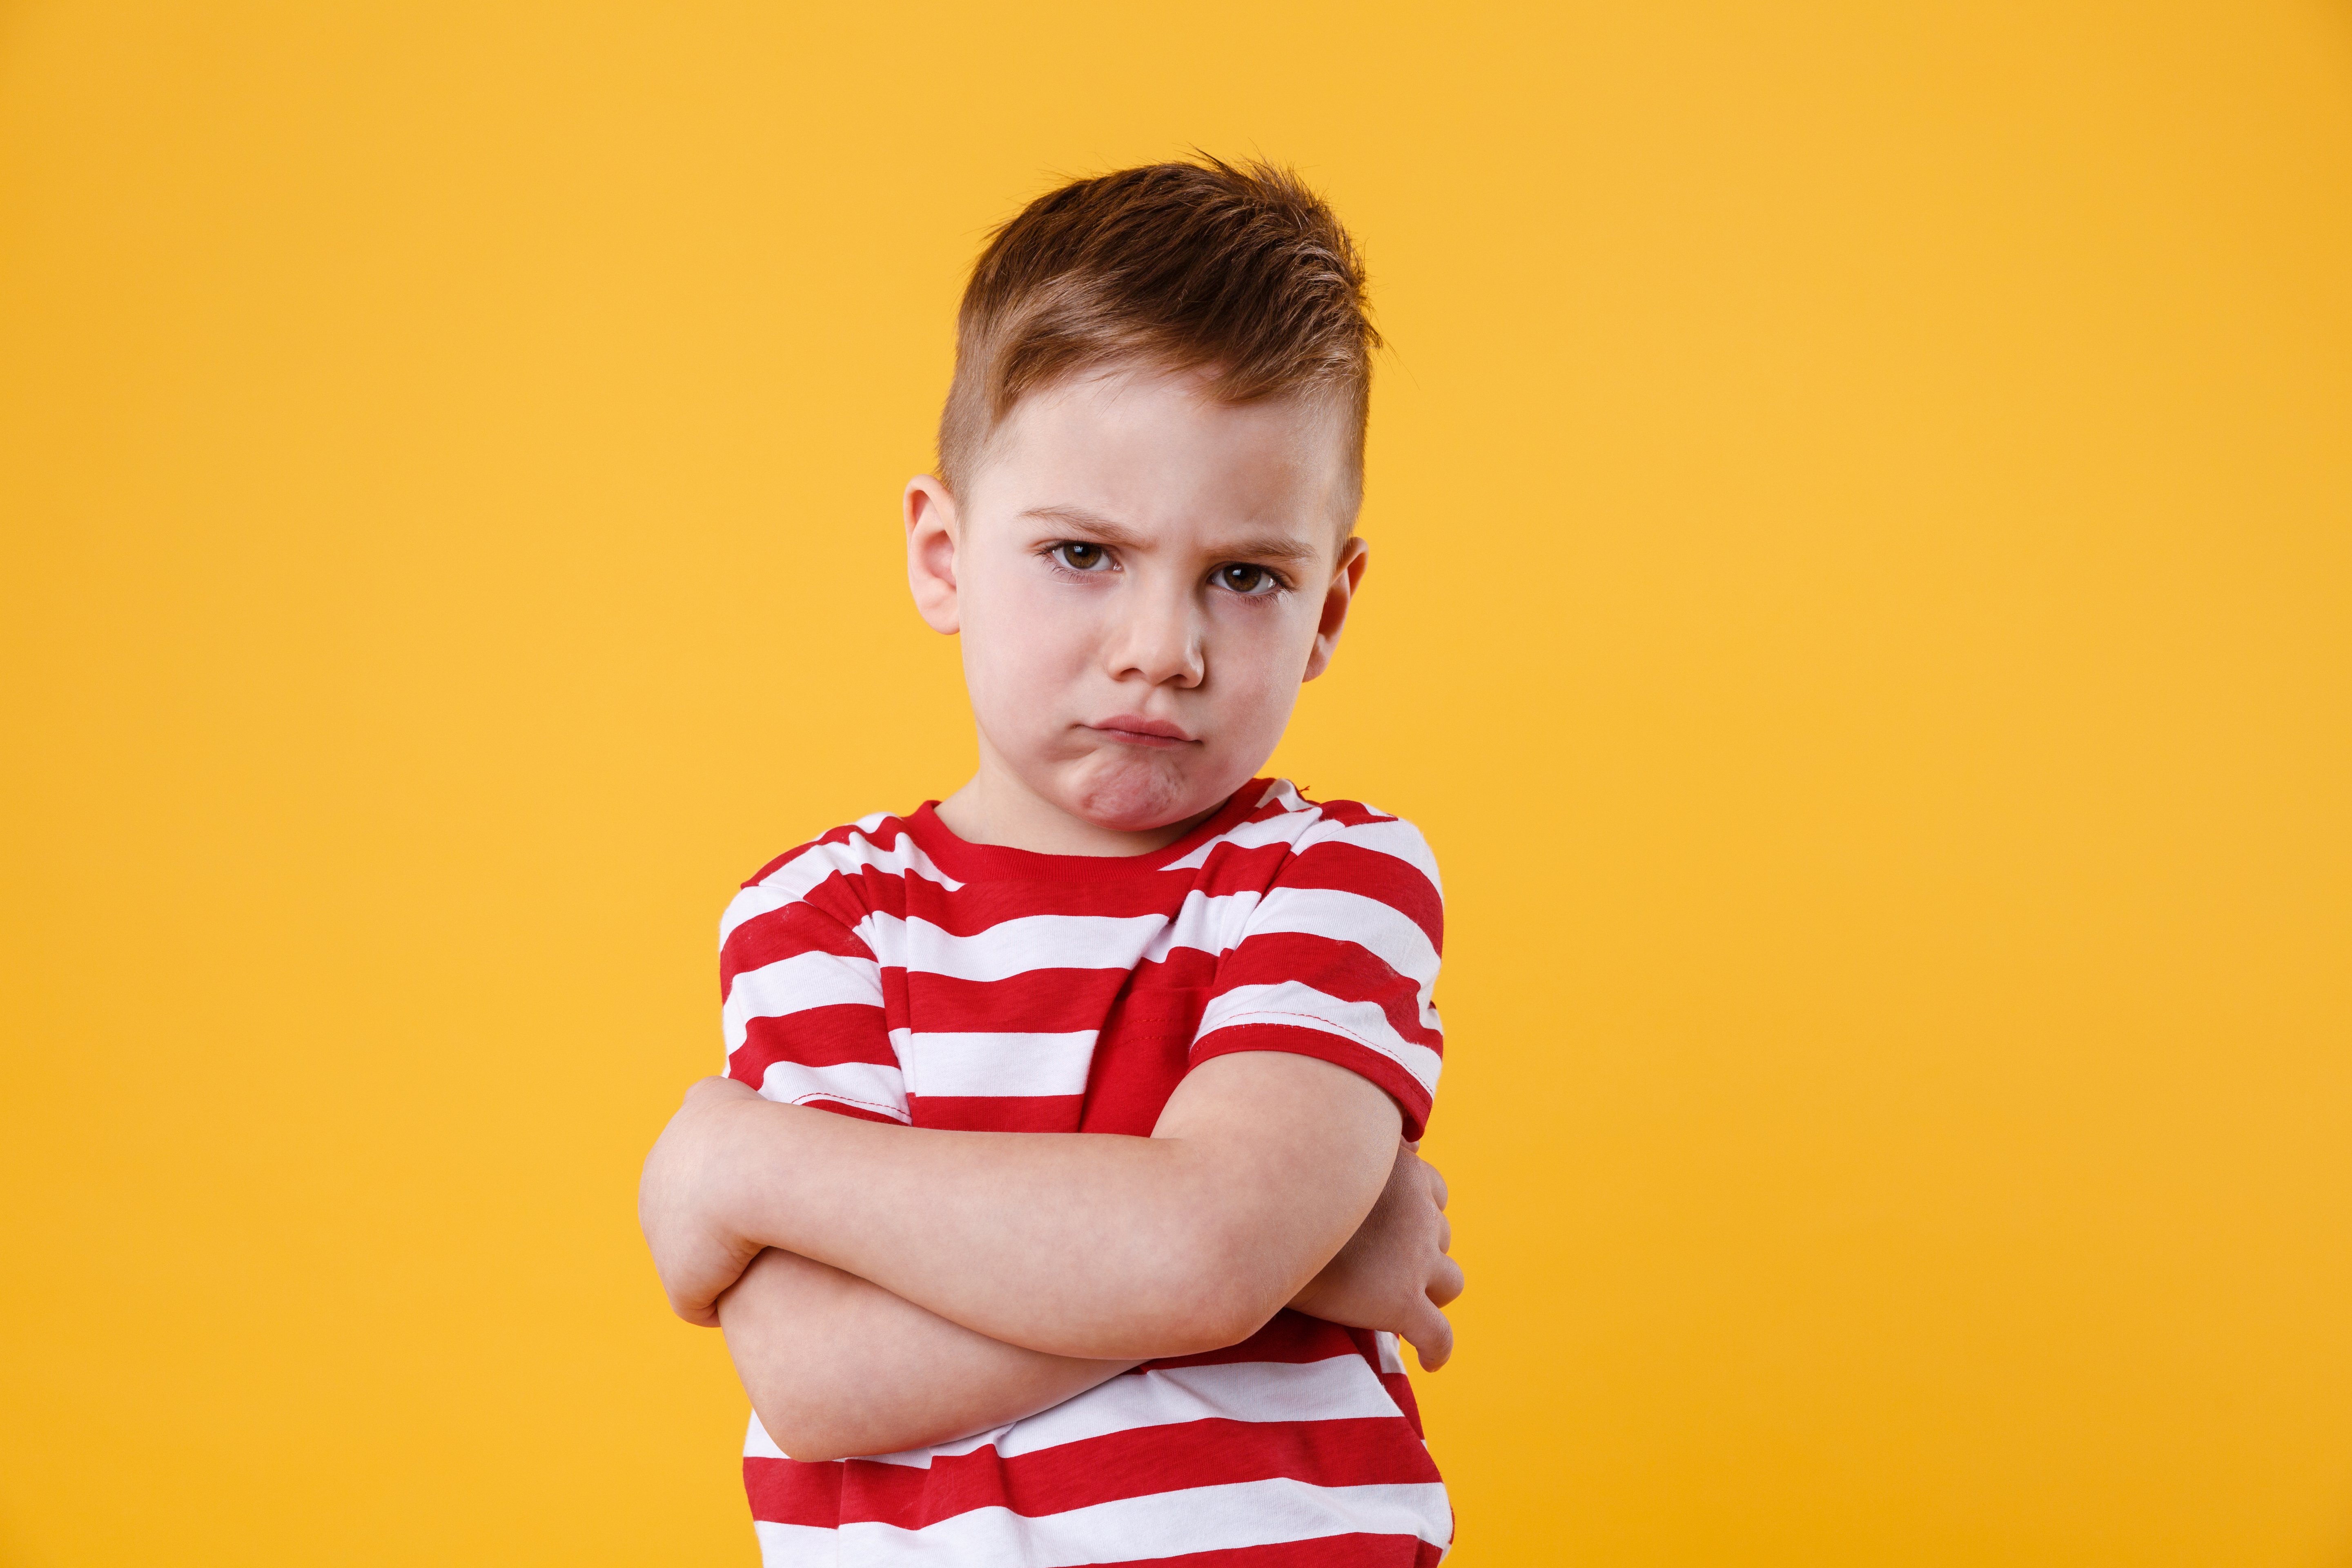 portrait-of-a-frowning-upset-little-boy-looking-at-camera-isolated-over-orange-backgro-SBI-303742960